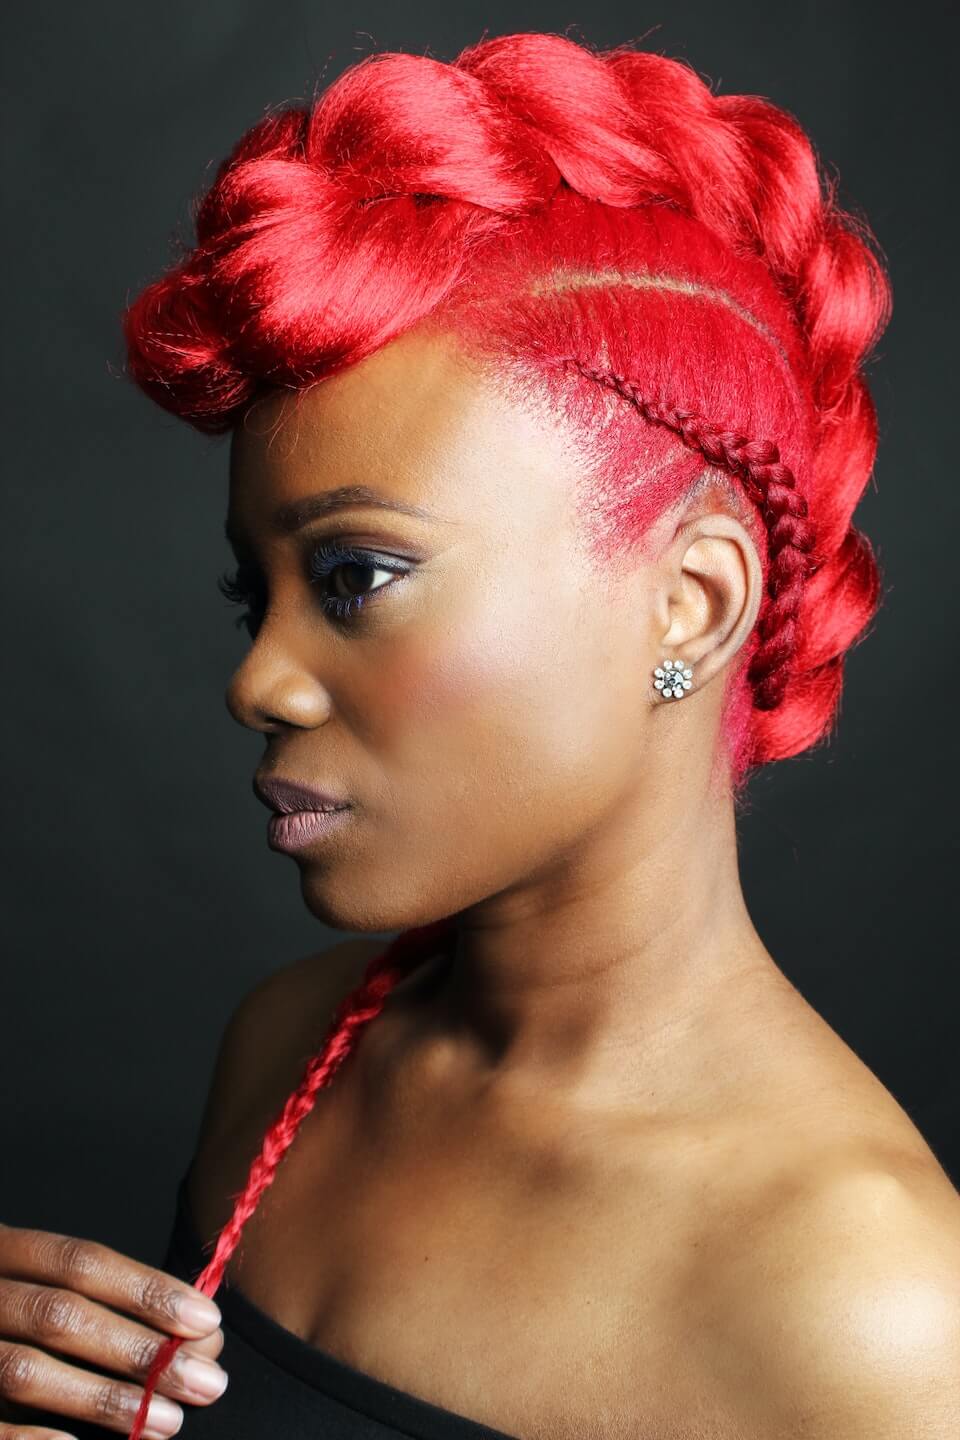 Woman with red hair braided.